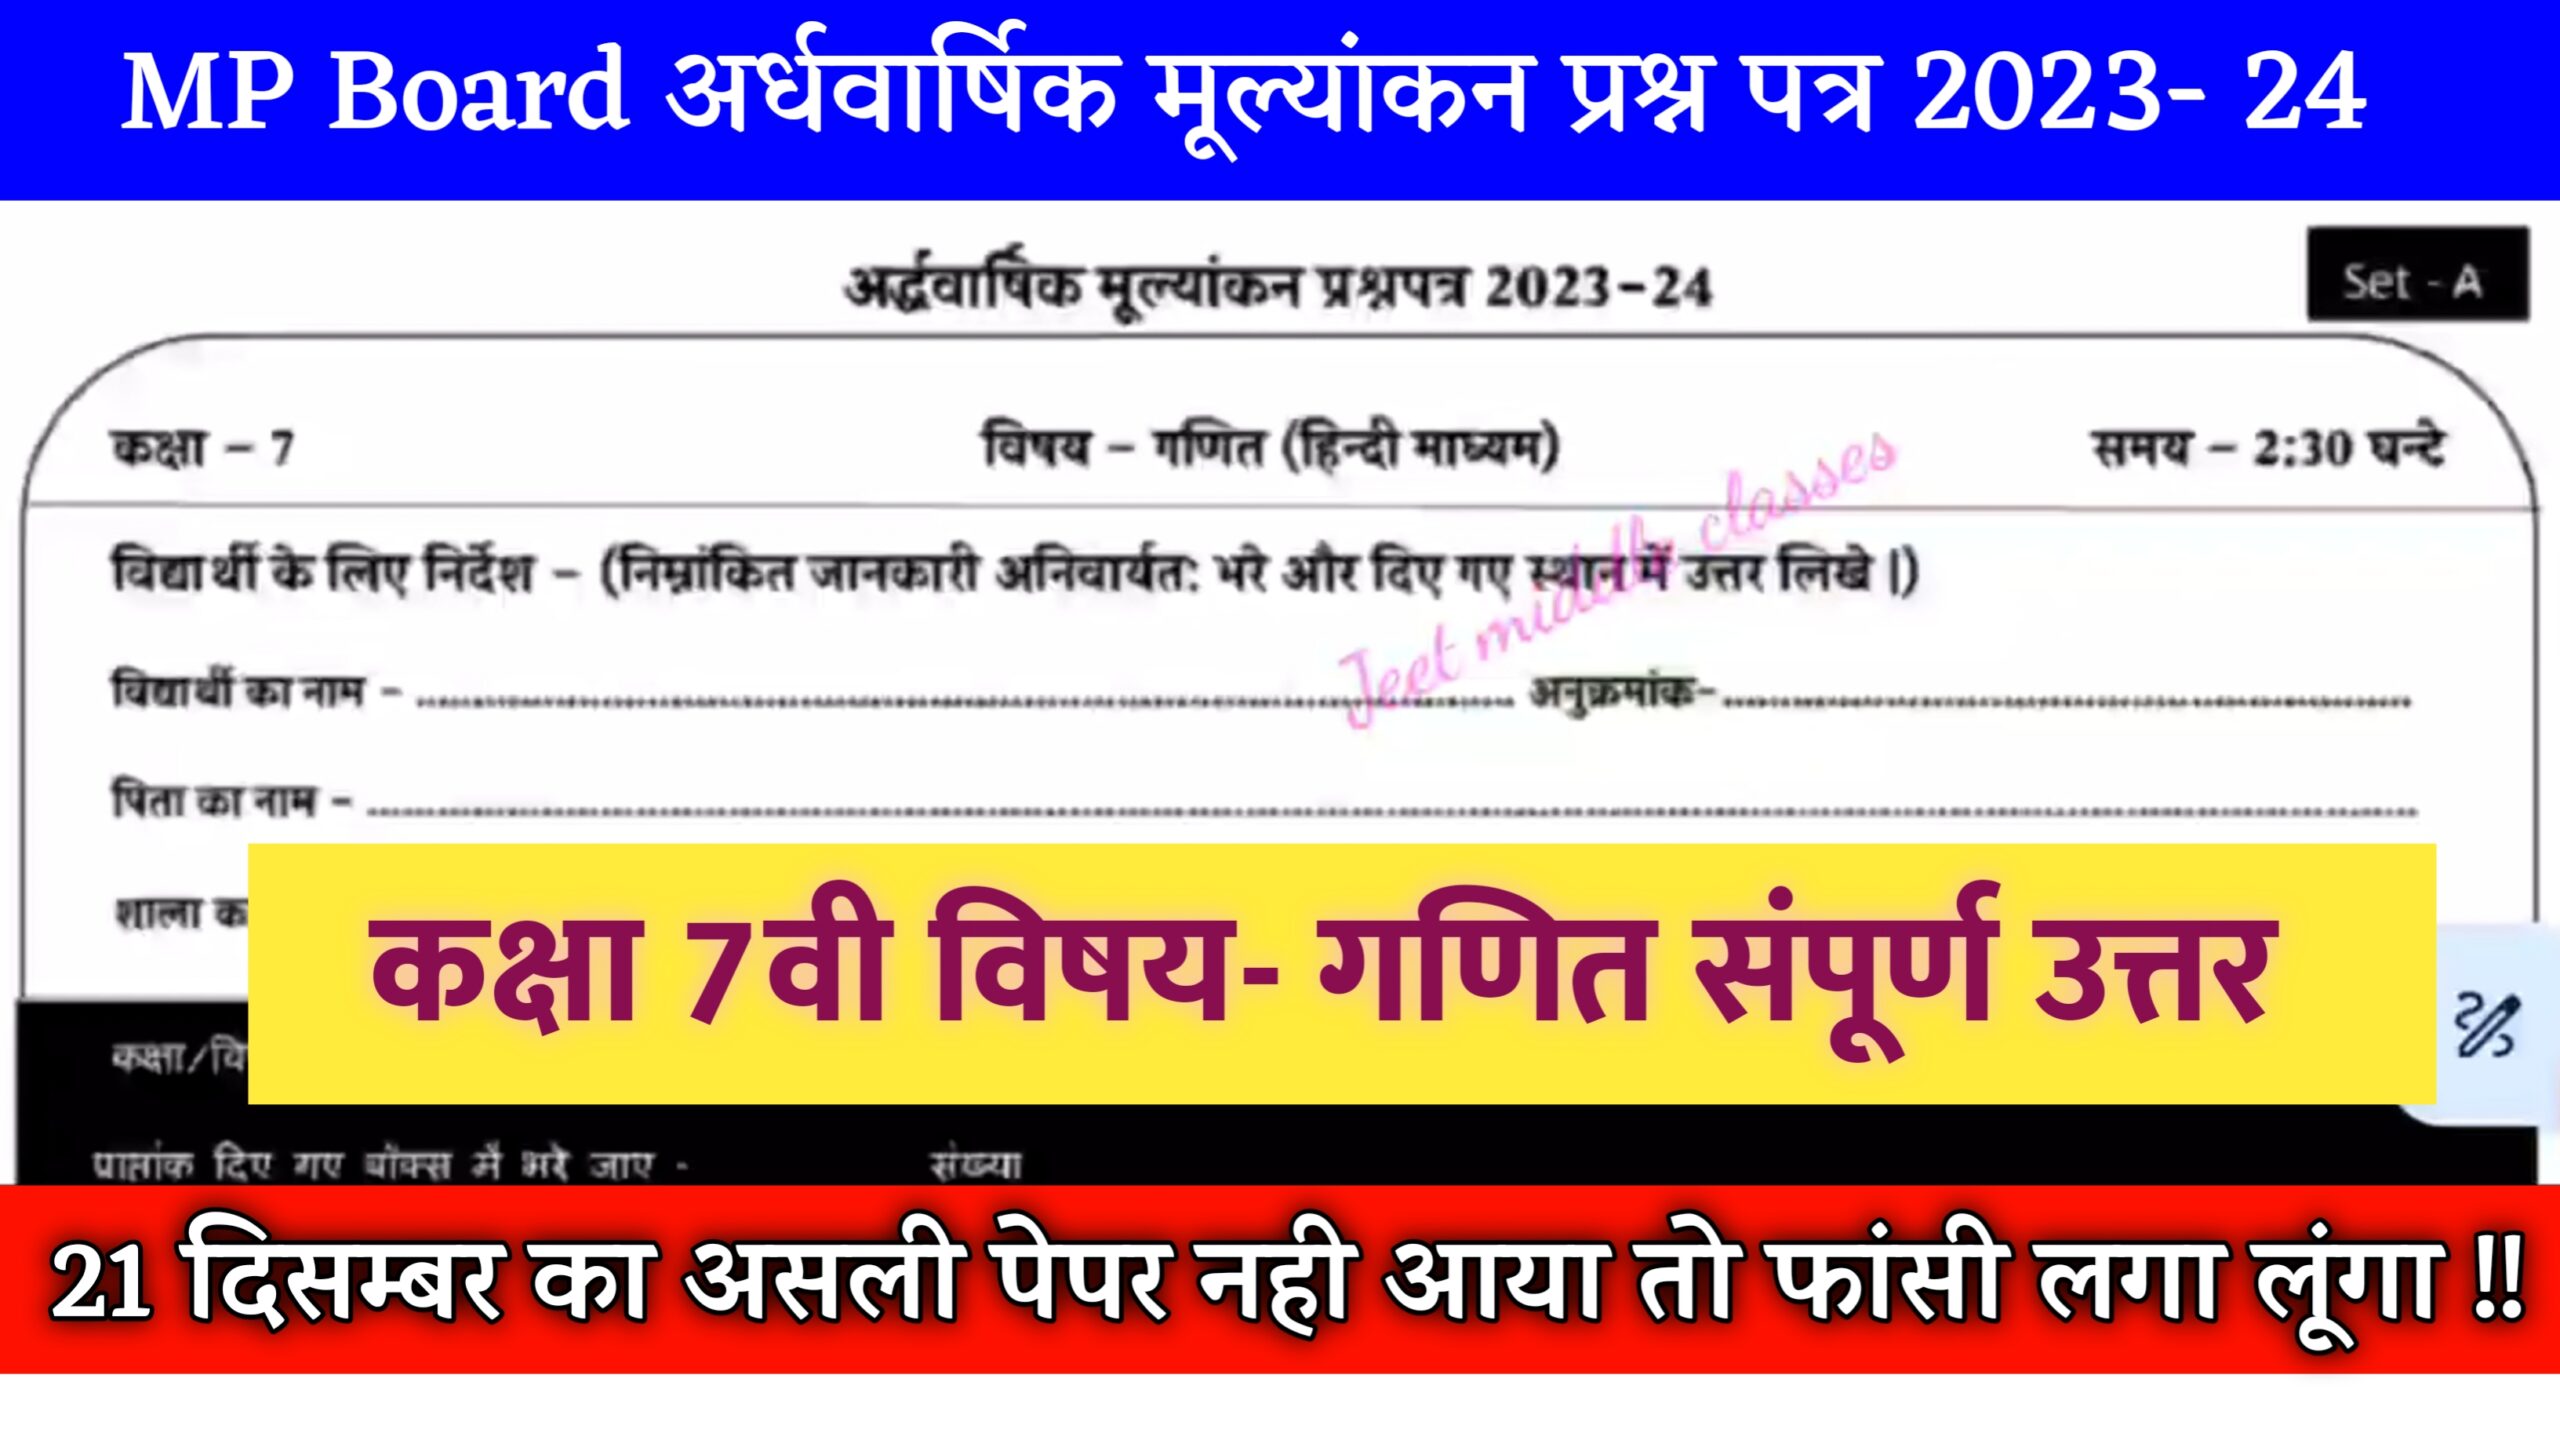 MP Board Class 7th Maths Half Yearly Paper 2023-24 , class 7th maths ardhvarshik paper 2023 mp board,mp board class 7th maths paper 2023,maths ka ardhvarshik paper 2023 class 7th,maths ka ardhvarshik paper 2023 class 7th mp board,maths ka ardhvarshik paper 2023 class 7th mp board,class 7th maths ardhvaarshik paper 2023,class 7 maths ardhvarshik paper 2023 mp board,class 7 maths ardhvarshik paper 2023 mp board,class 7th maths ardhvarshik paper 2023 mp board,mp board maths ardhvarshik paper 2023 class 7th, class 7th maths paper 2023,class 7th half yearly paper,class 7th half yearly exam paper,mp board half yearly 2023 class 7 math paper,class 7th maths real paper,mp board class 7 half yearly math paper,